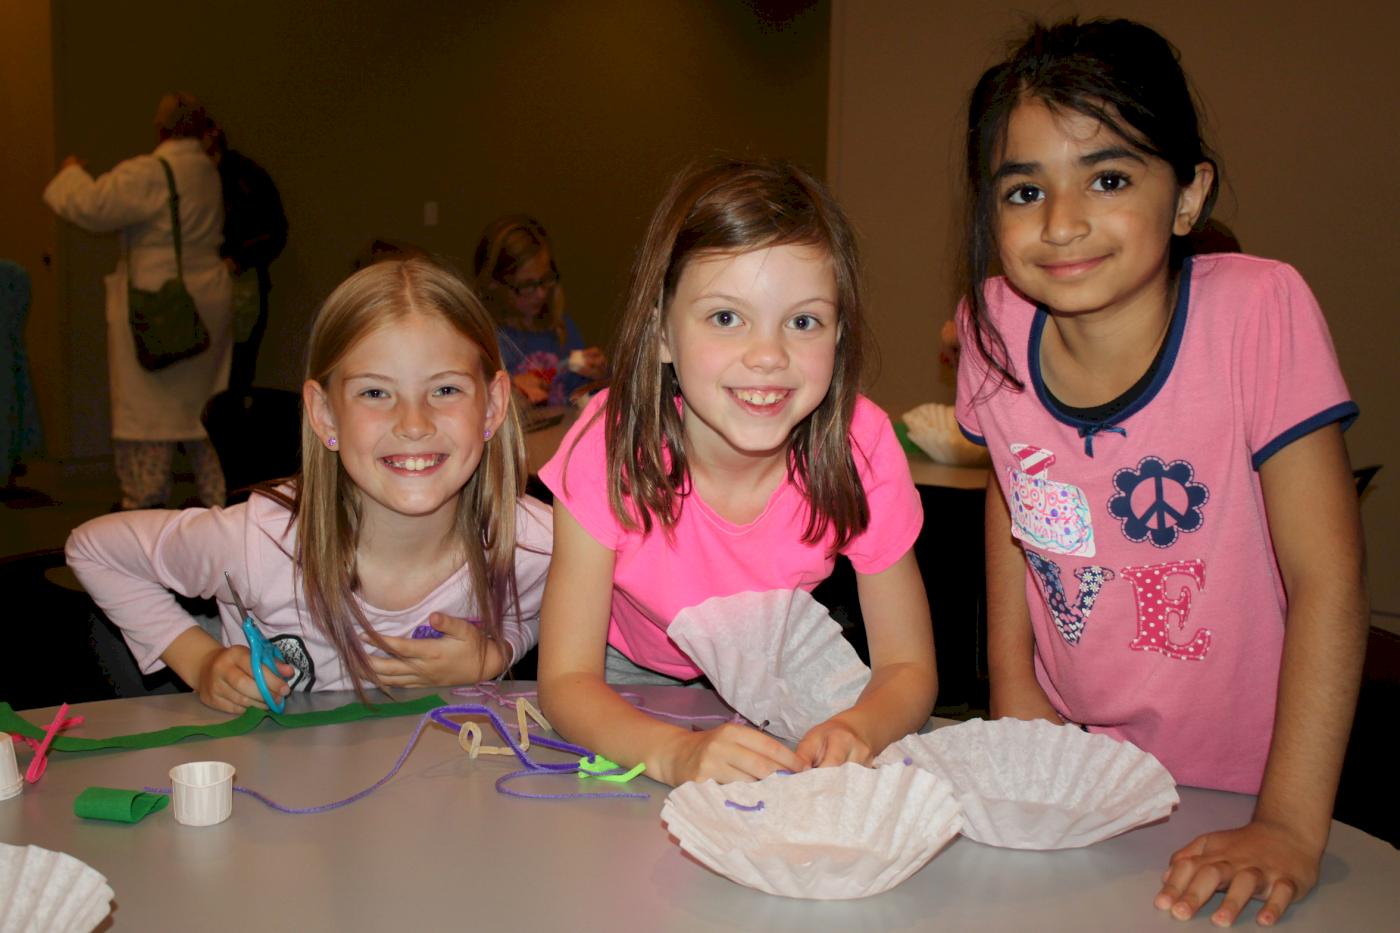 Pajama Party Makes Science Fun for Girls